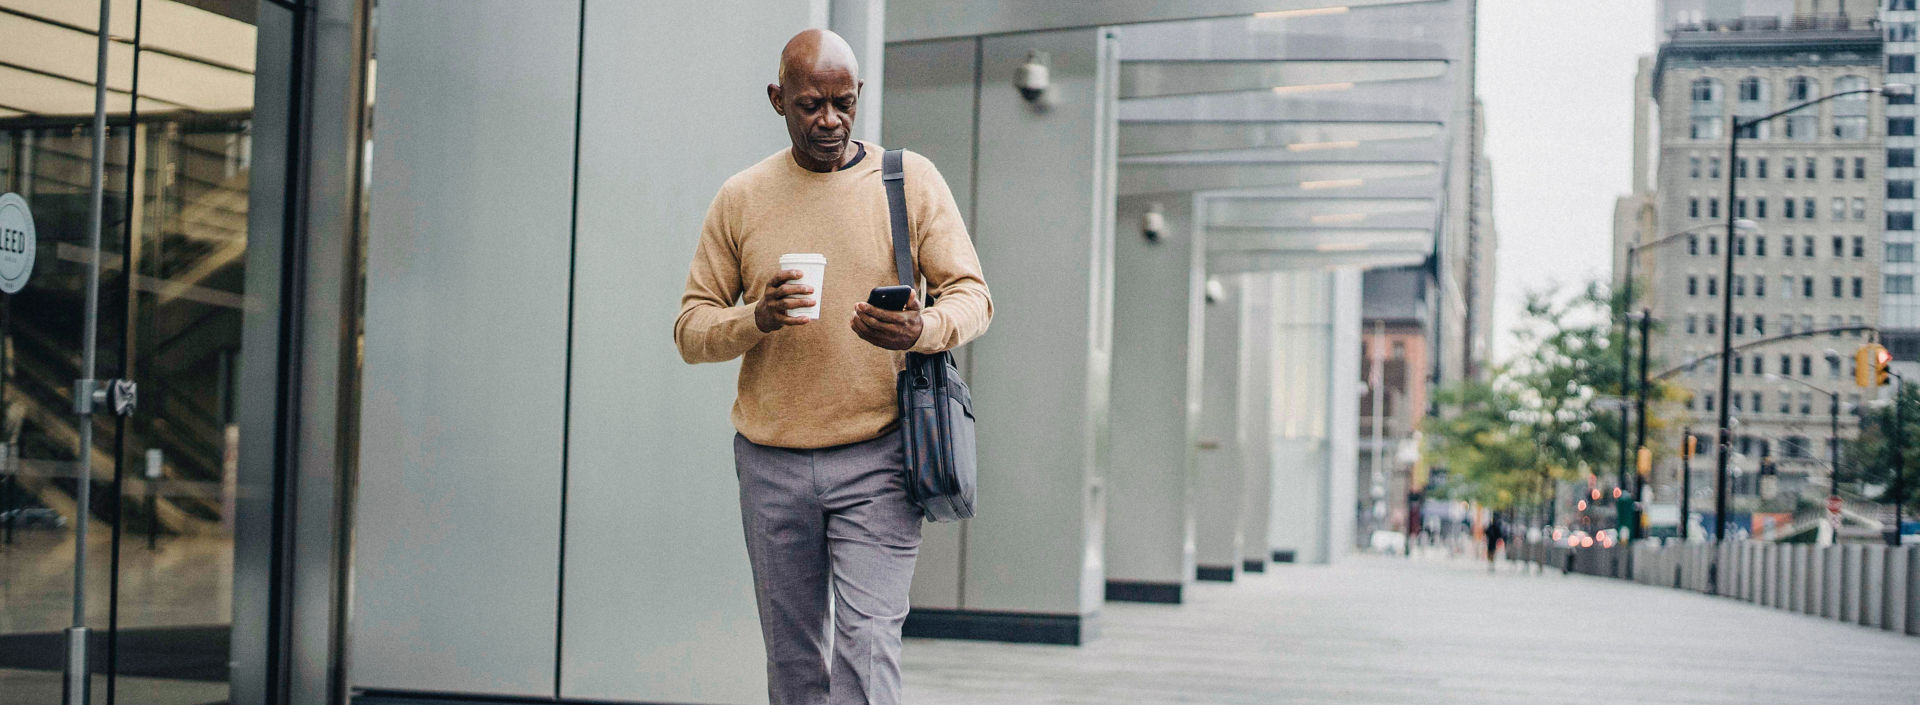 KONE - Man walking outside office building holding coffee cup and a smartphone.